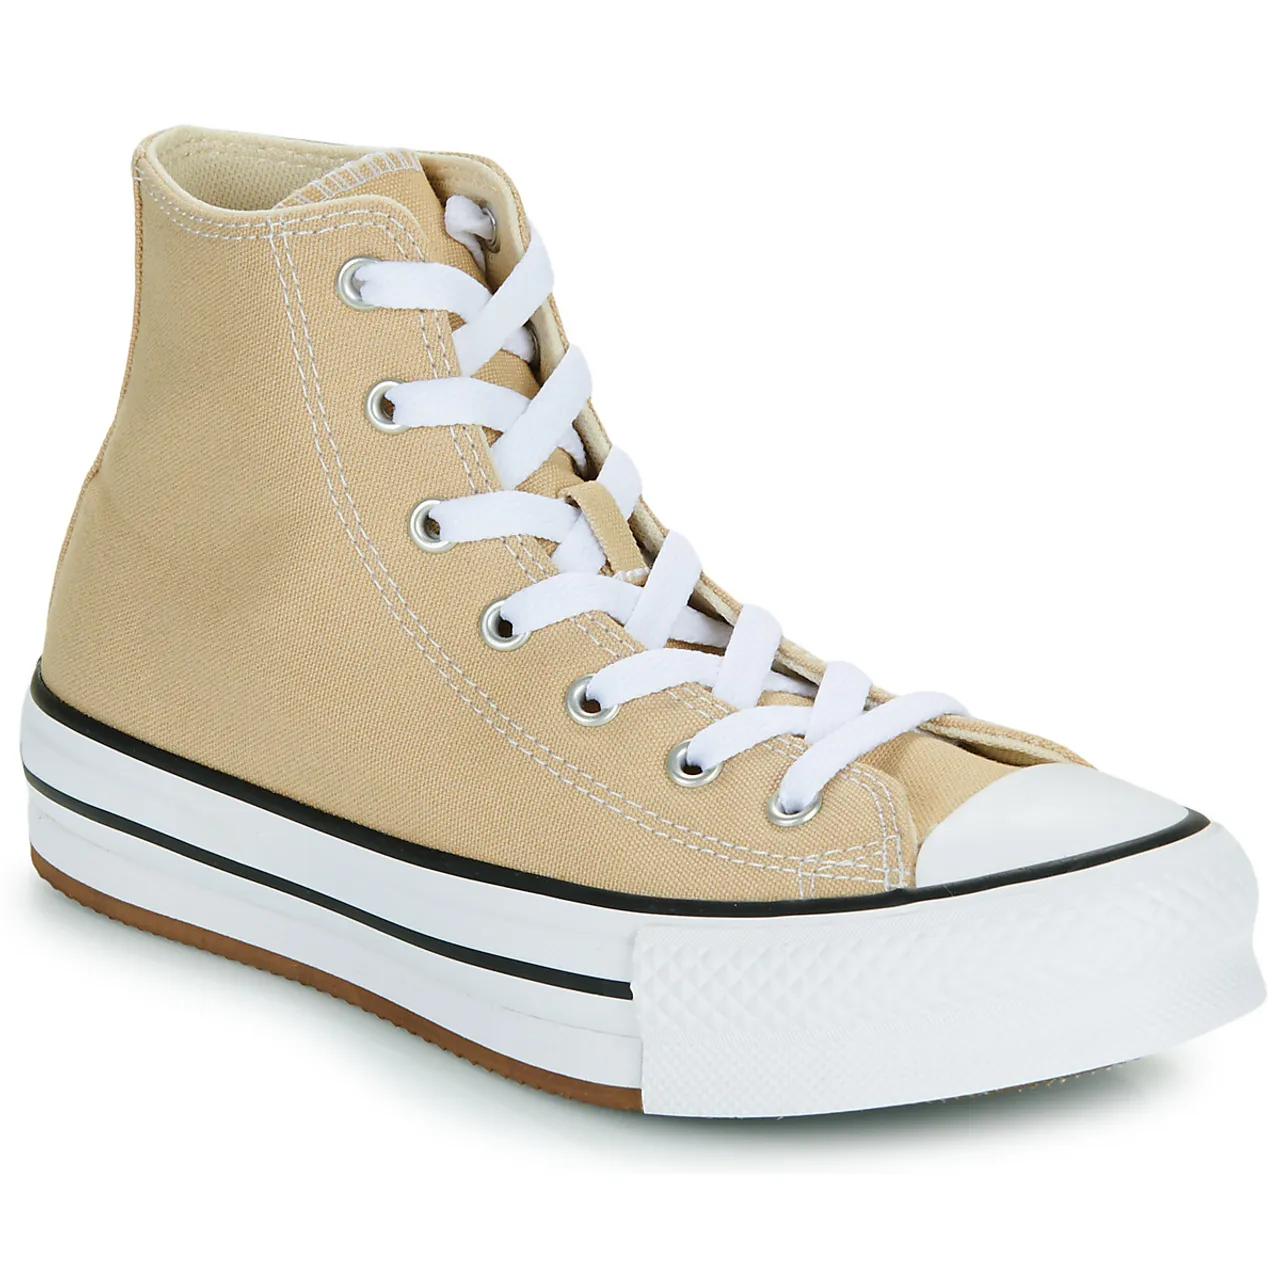 Converse  CHUCK TAYLOR ALL STAR EVA LIFT  boys's Children's Shoes (High-top Trainers) in Beige